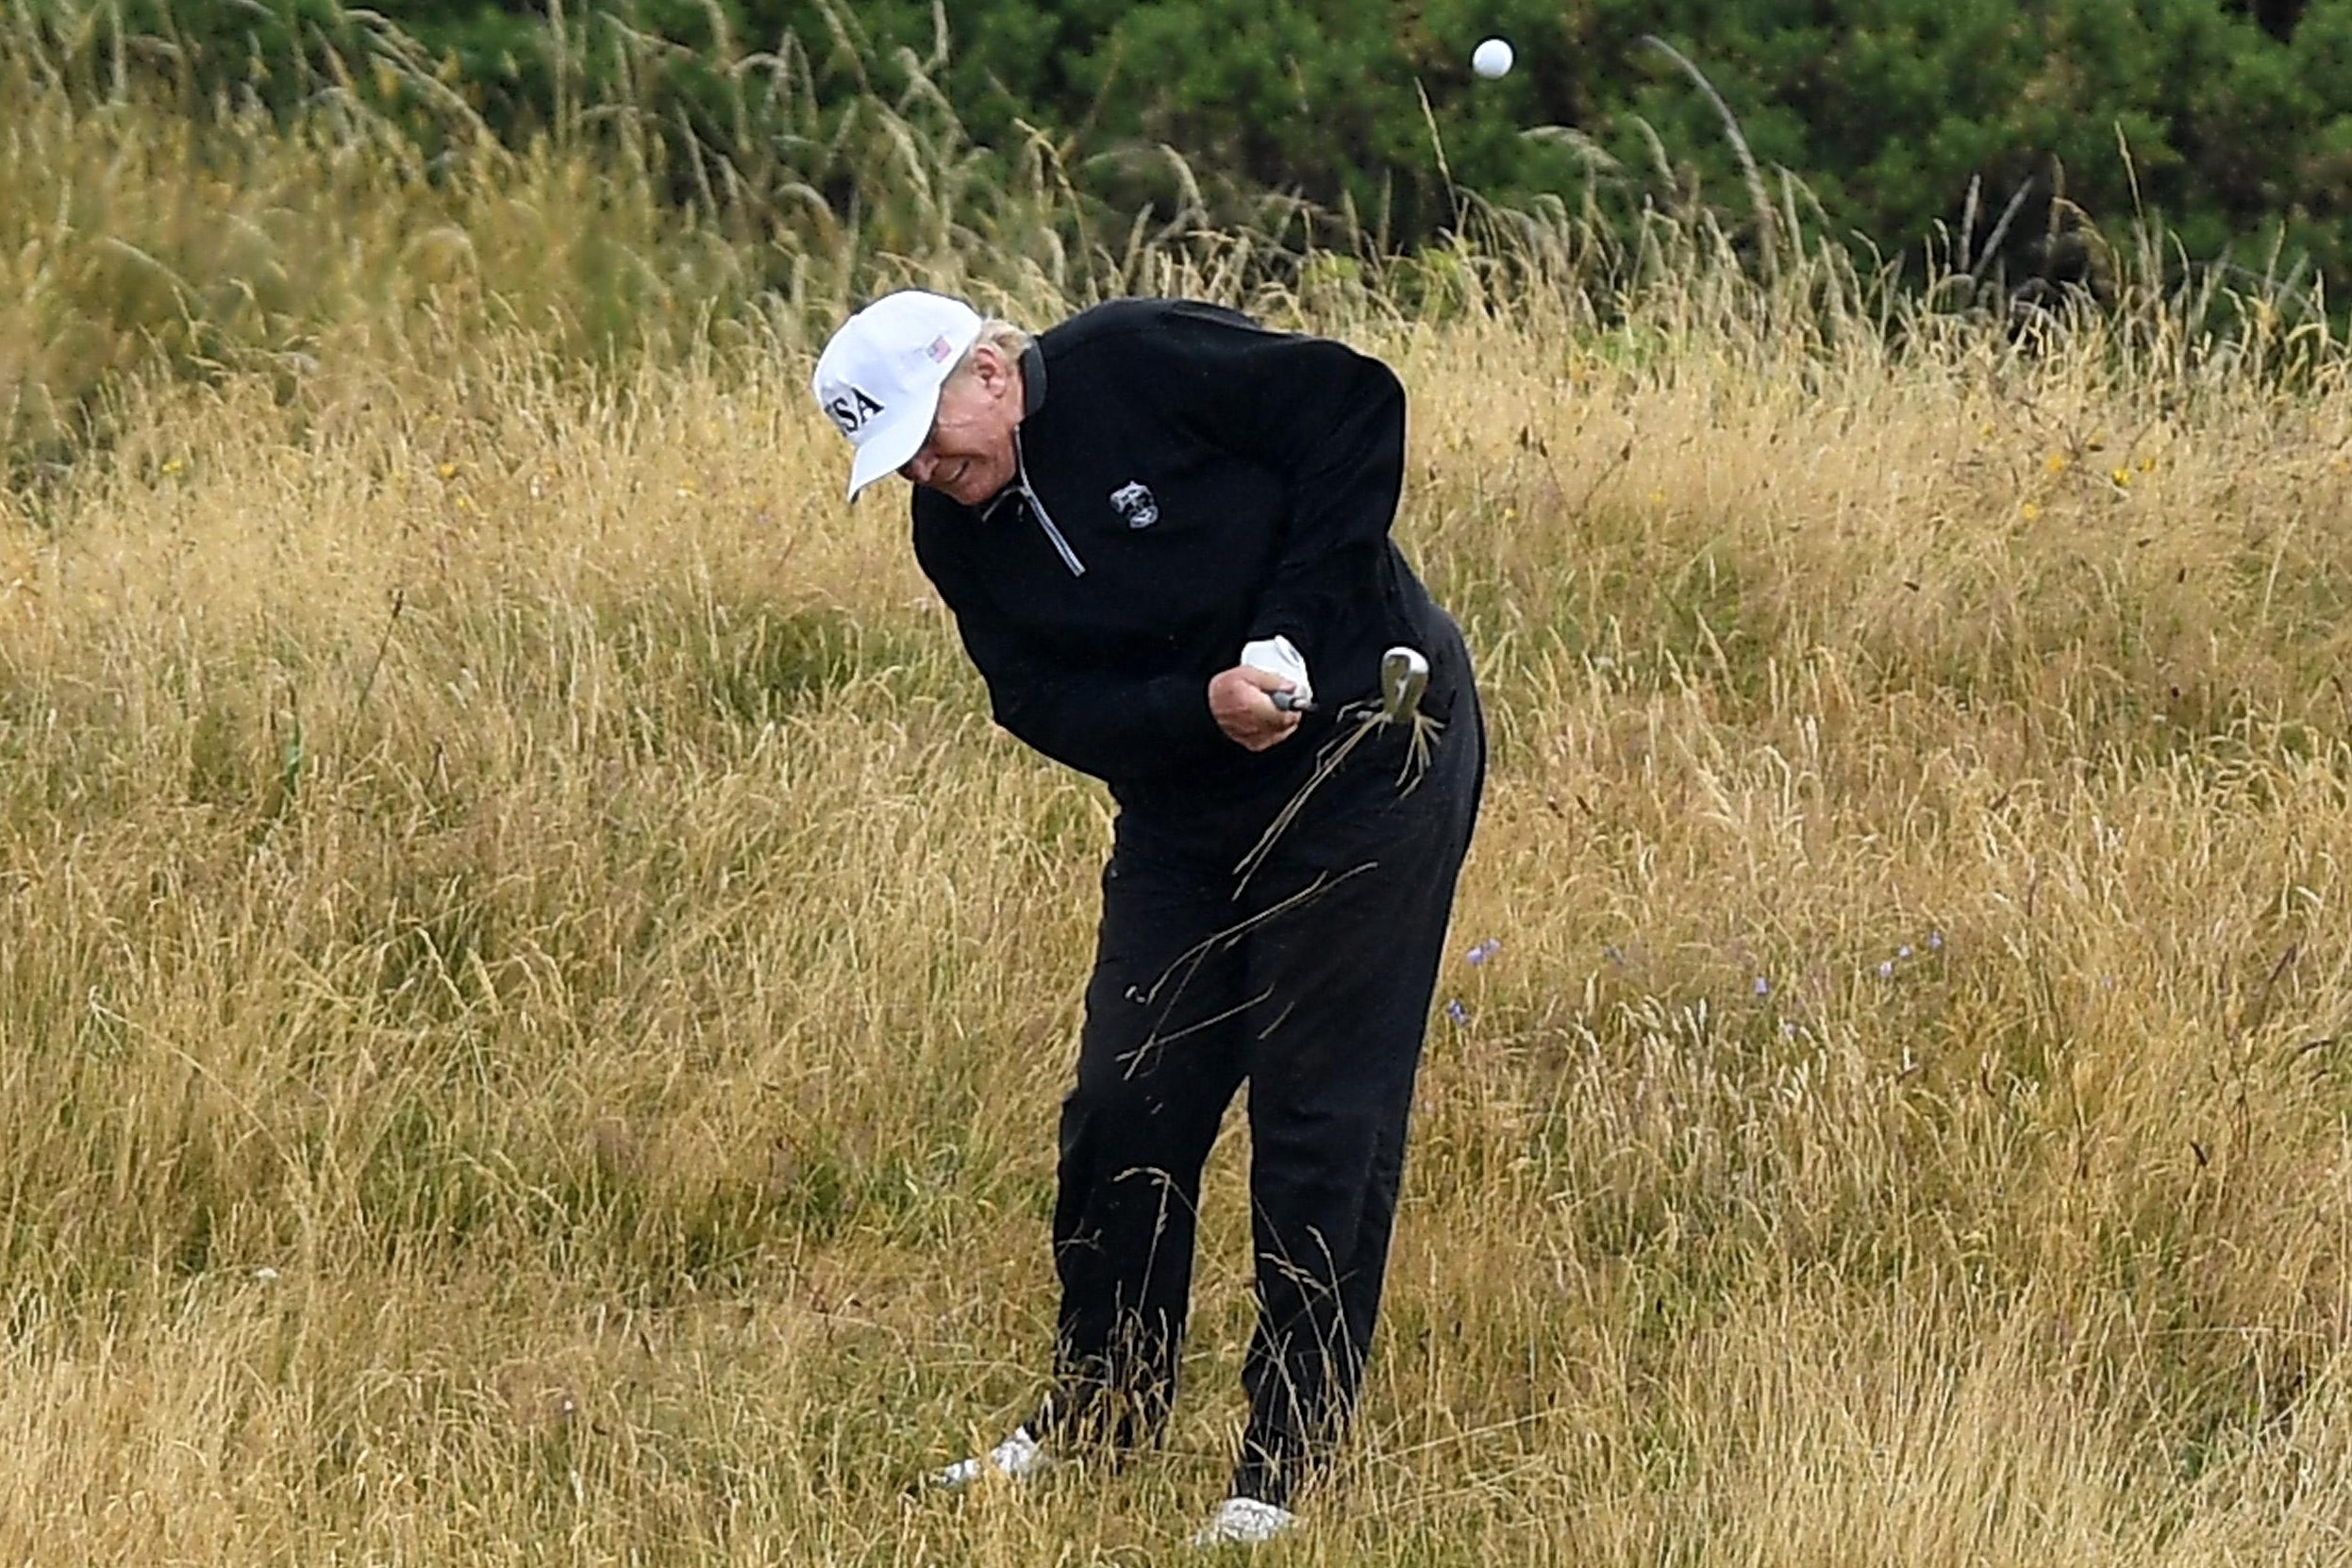 Donald Trump playing golf in a field of tall grass.